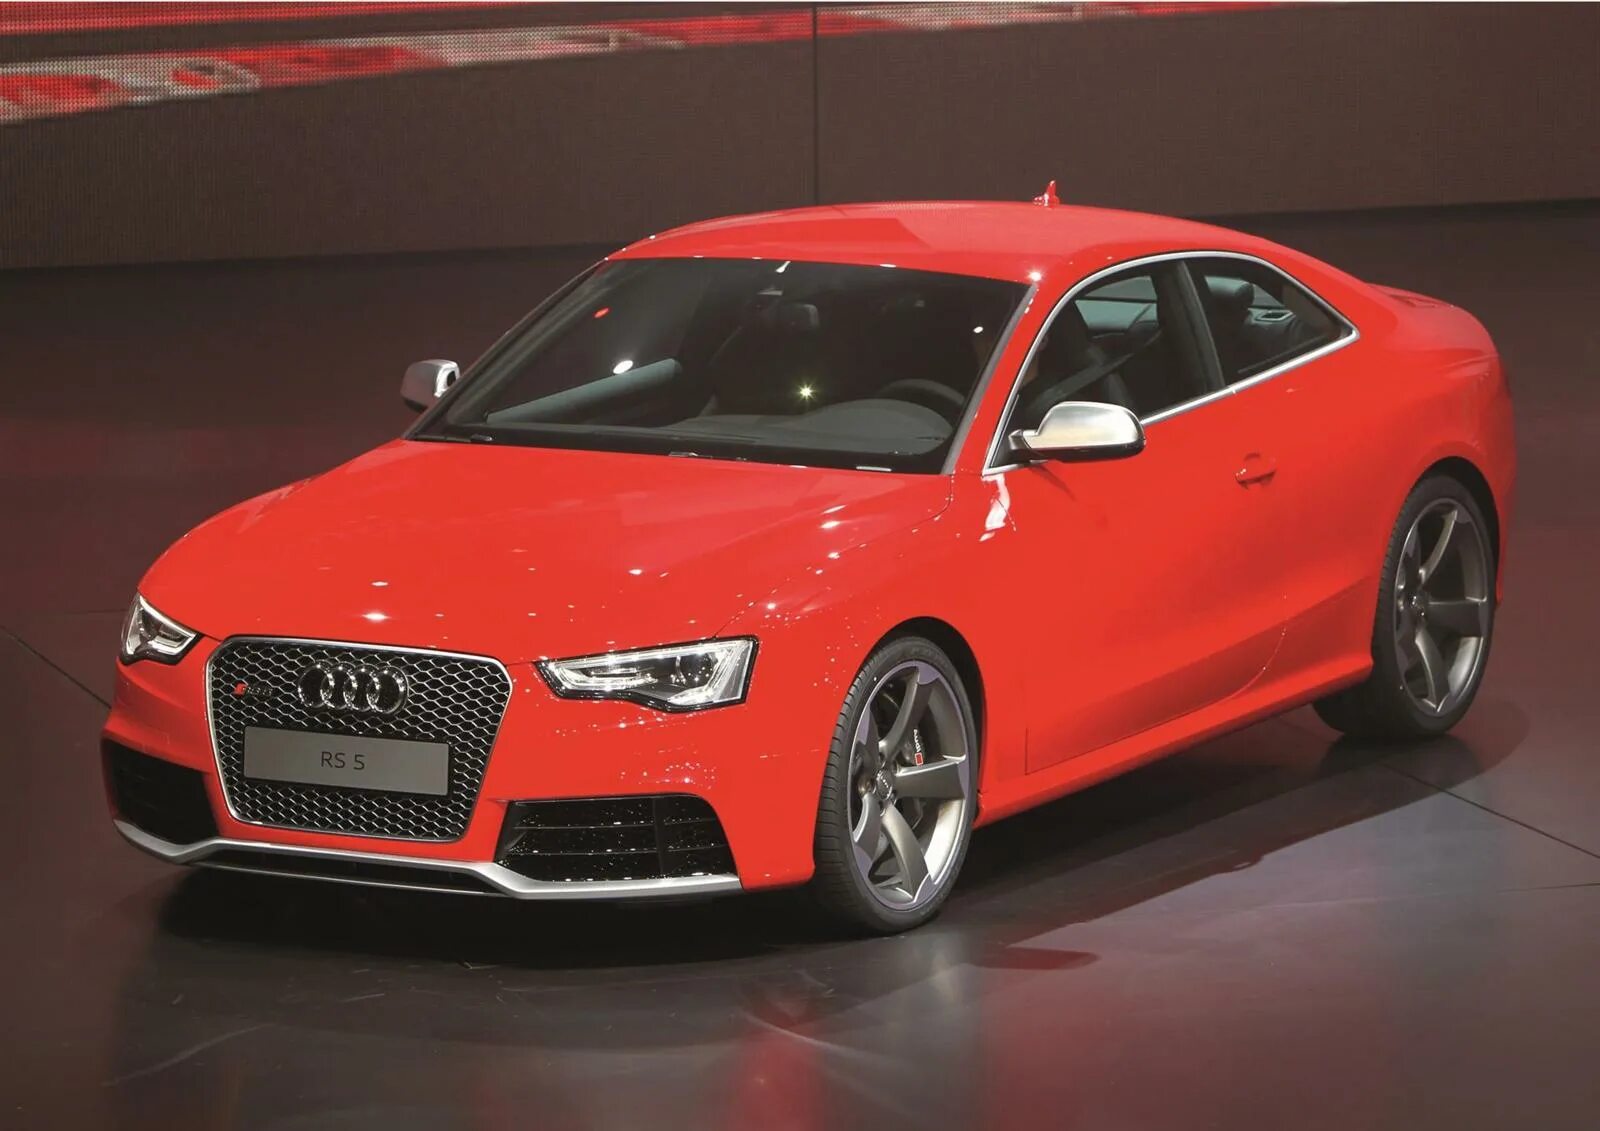 Ауди rs5 2011. Ауди rs5 Coupe 2011. "Audi" "s5" "2011" RS. "Audi" "RS 5" "2011" T.